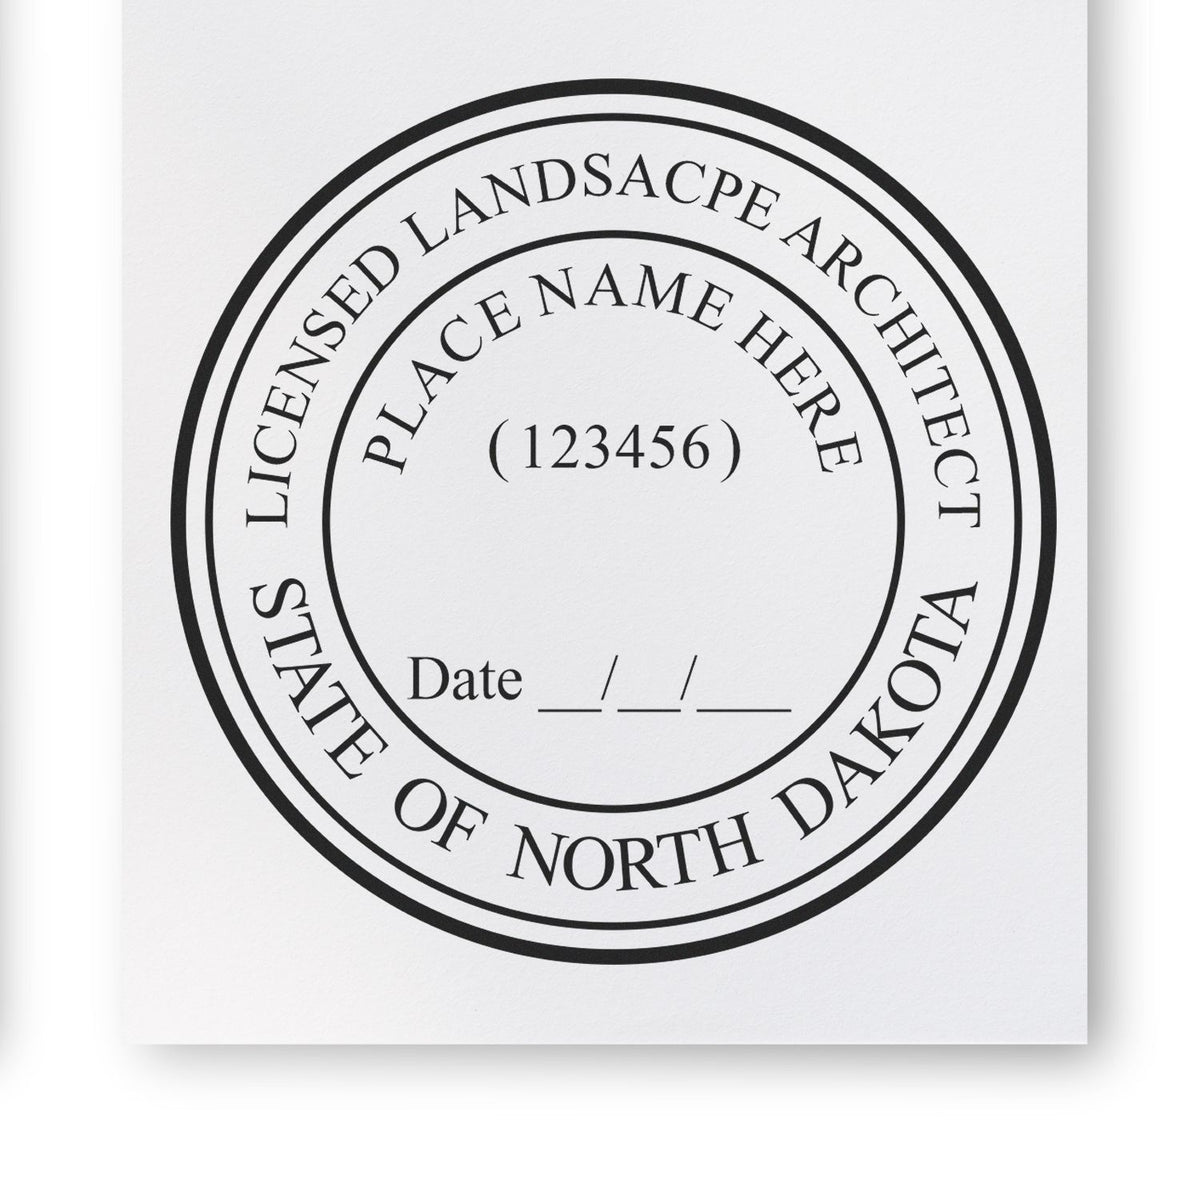 Slim Pre-Inked North Dakota Landscape Architect Seal Stamp in use photo showing a stamped imprint of the Slim Pre-Inked North Dakota Landscape Architect Seal Stamp